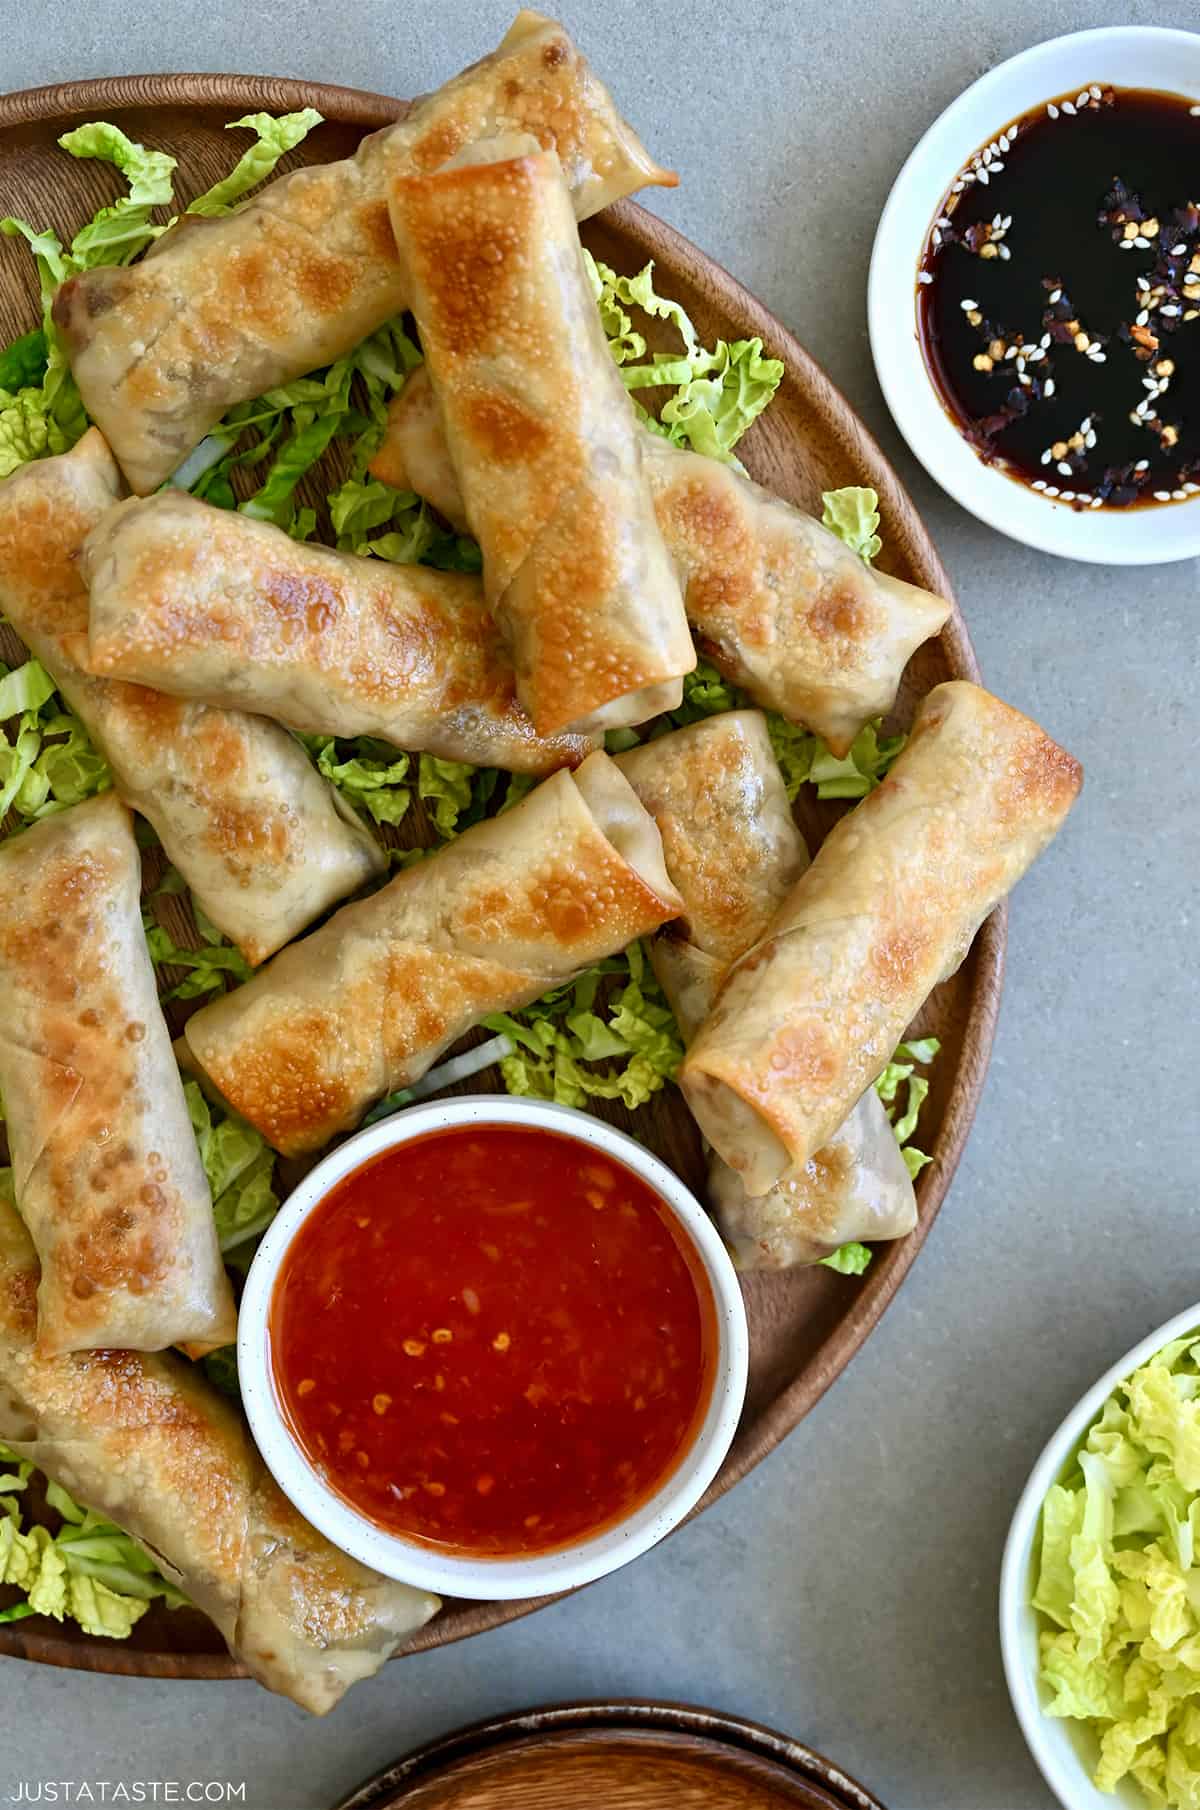 Crispy baked chicken spring rolls on a bed of shredded green cabbage next to a small bowl containing sweet chili sauce.